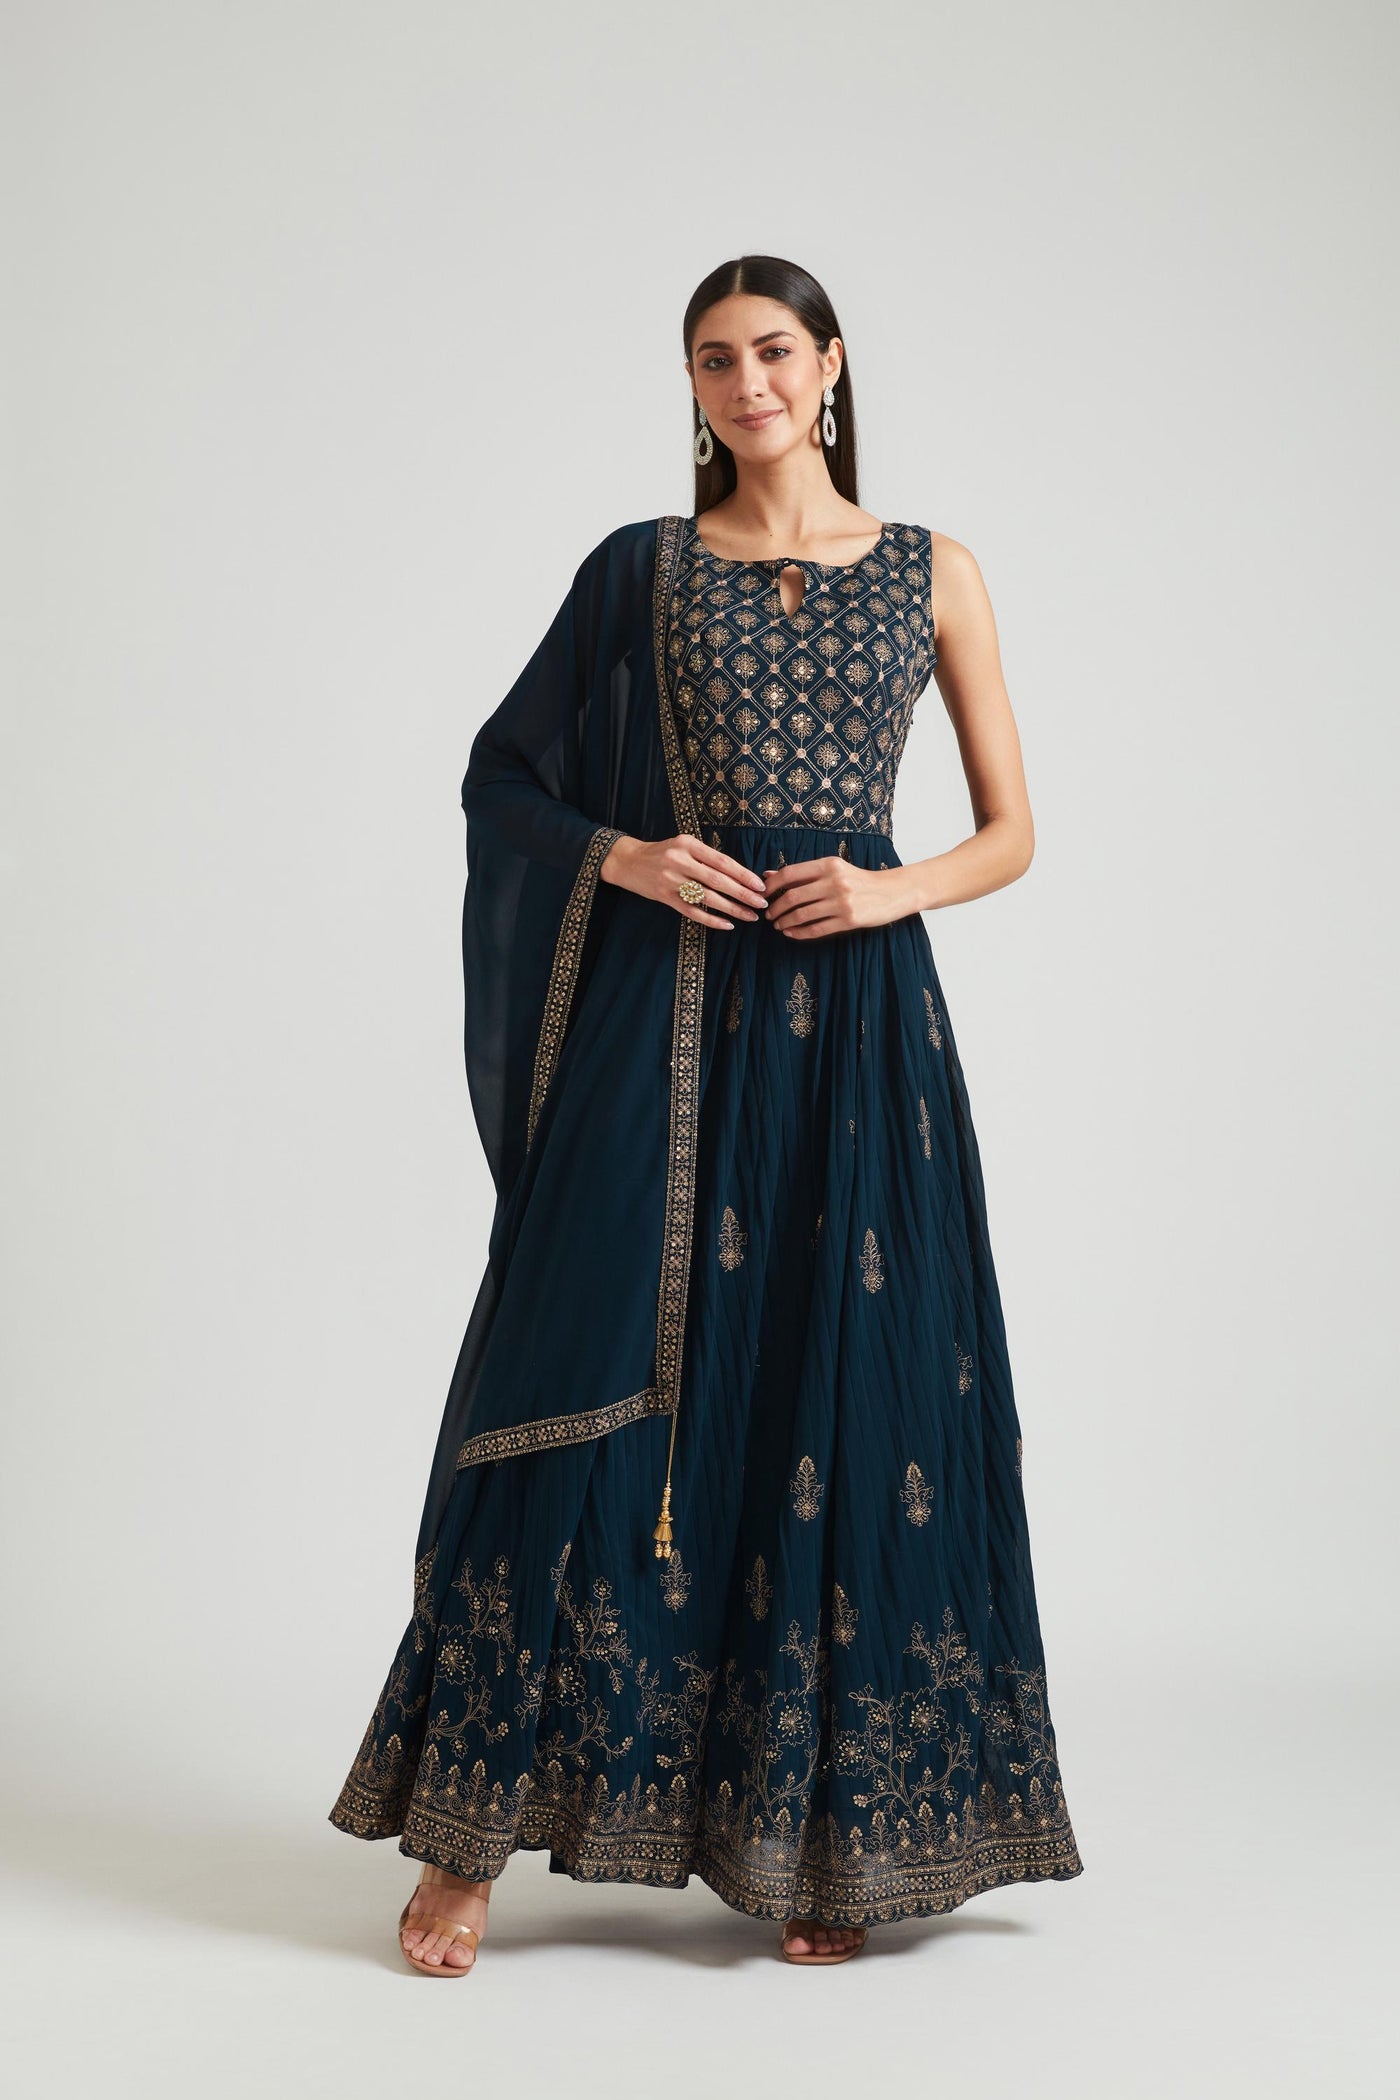 Neeru's Peacock Color Georgette Fabric Gown